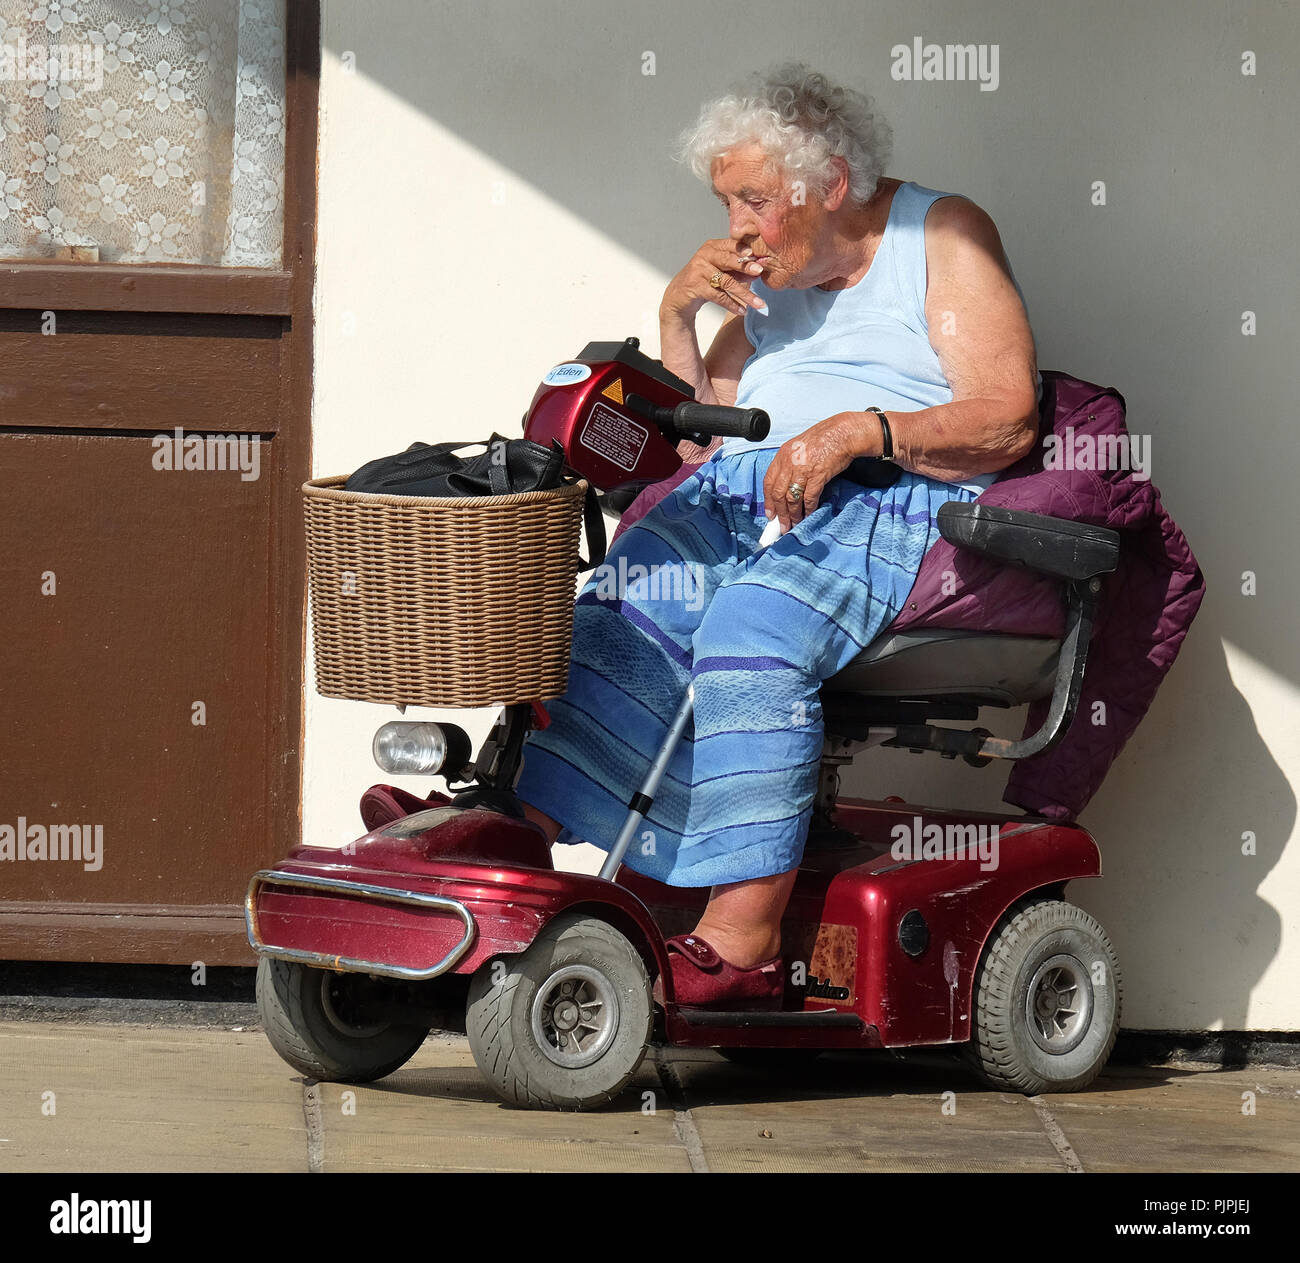 Old Lady On Scooter High Resolution Stock Photography and Images - Alamy